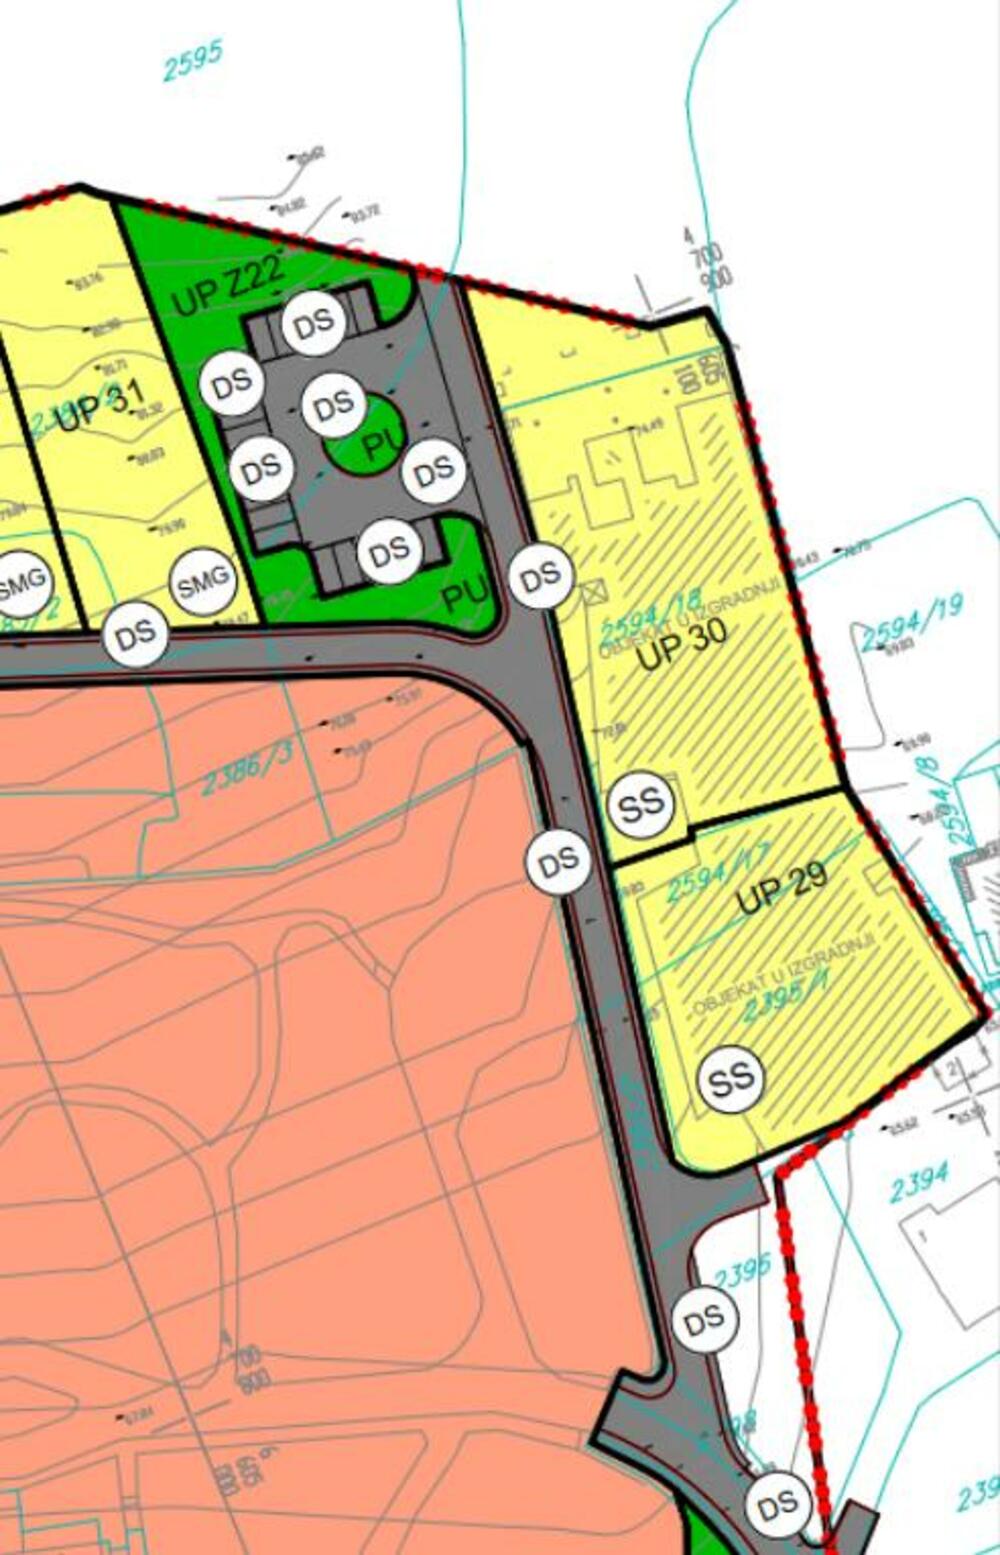 A detail from the Urban Plan showing that it is a public area